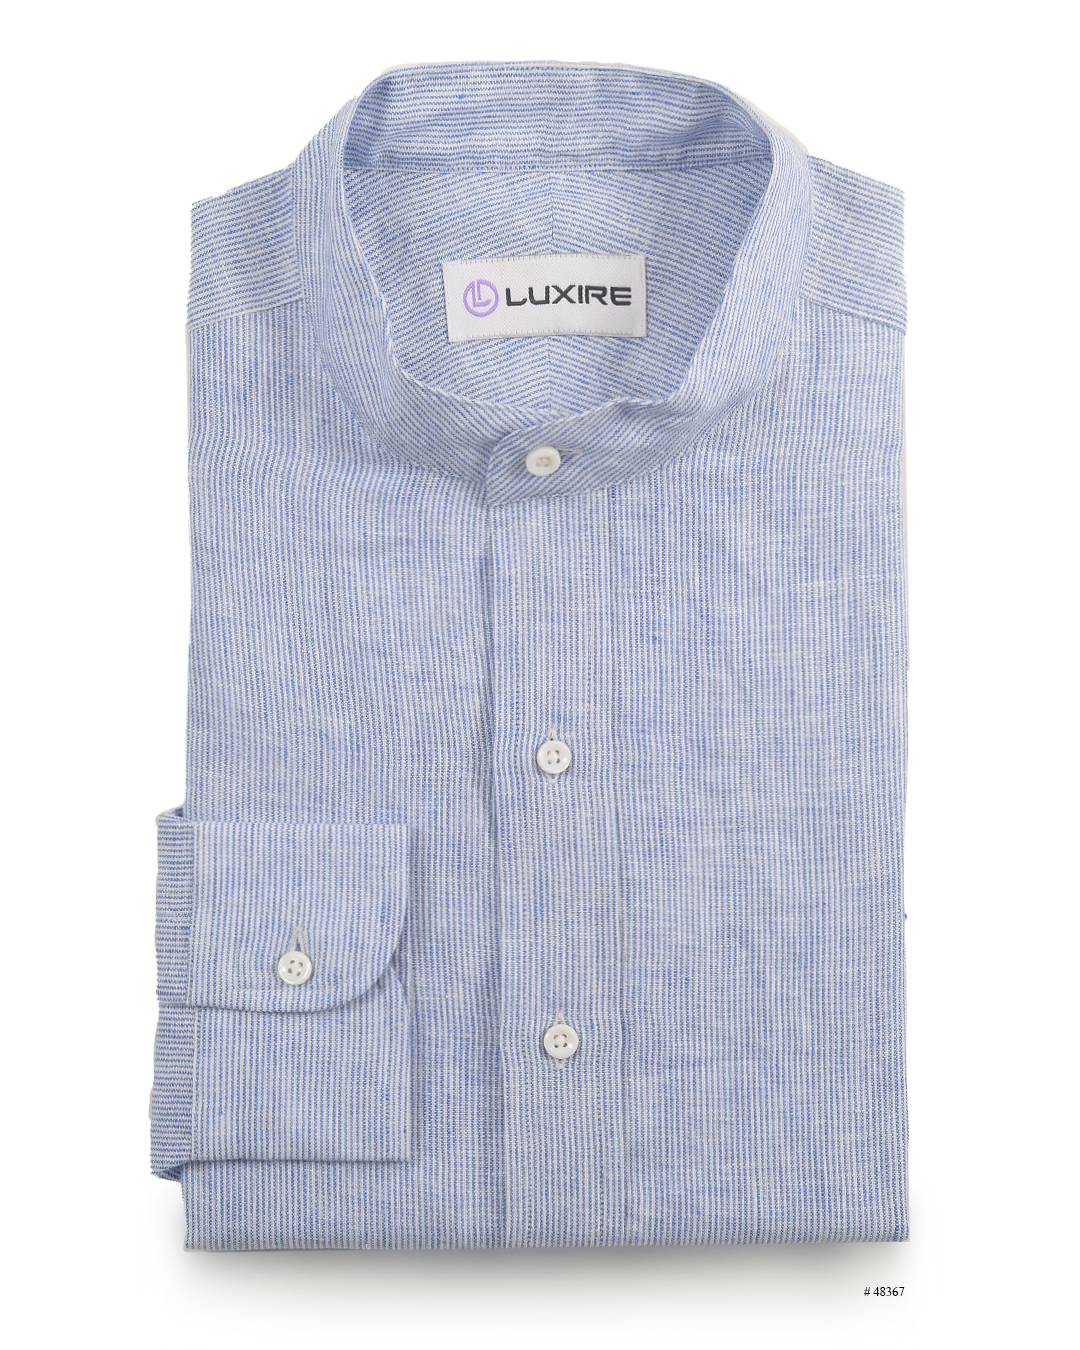 Front of the custom linen shirt for men in blue and white dress stripe by Luxire Clothing